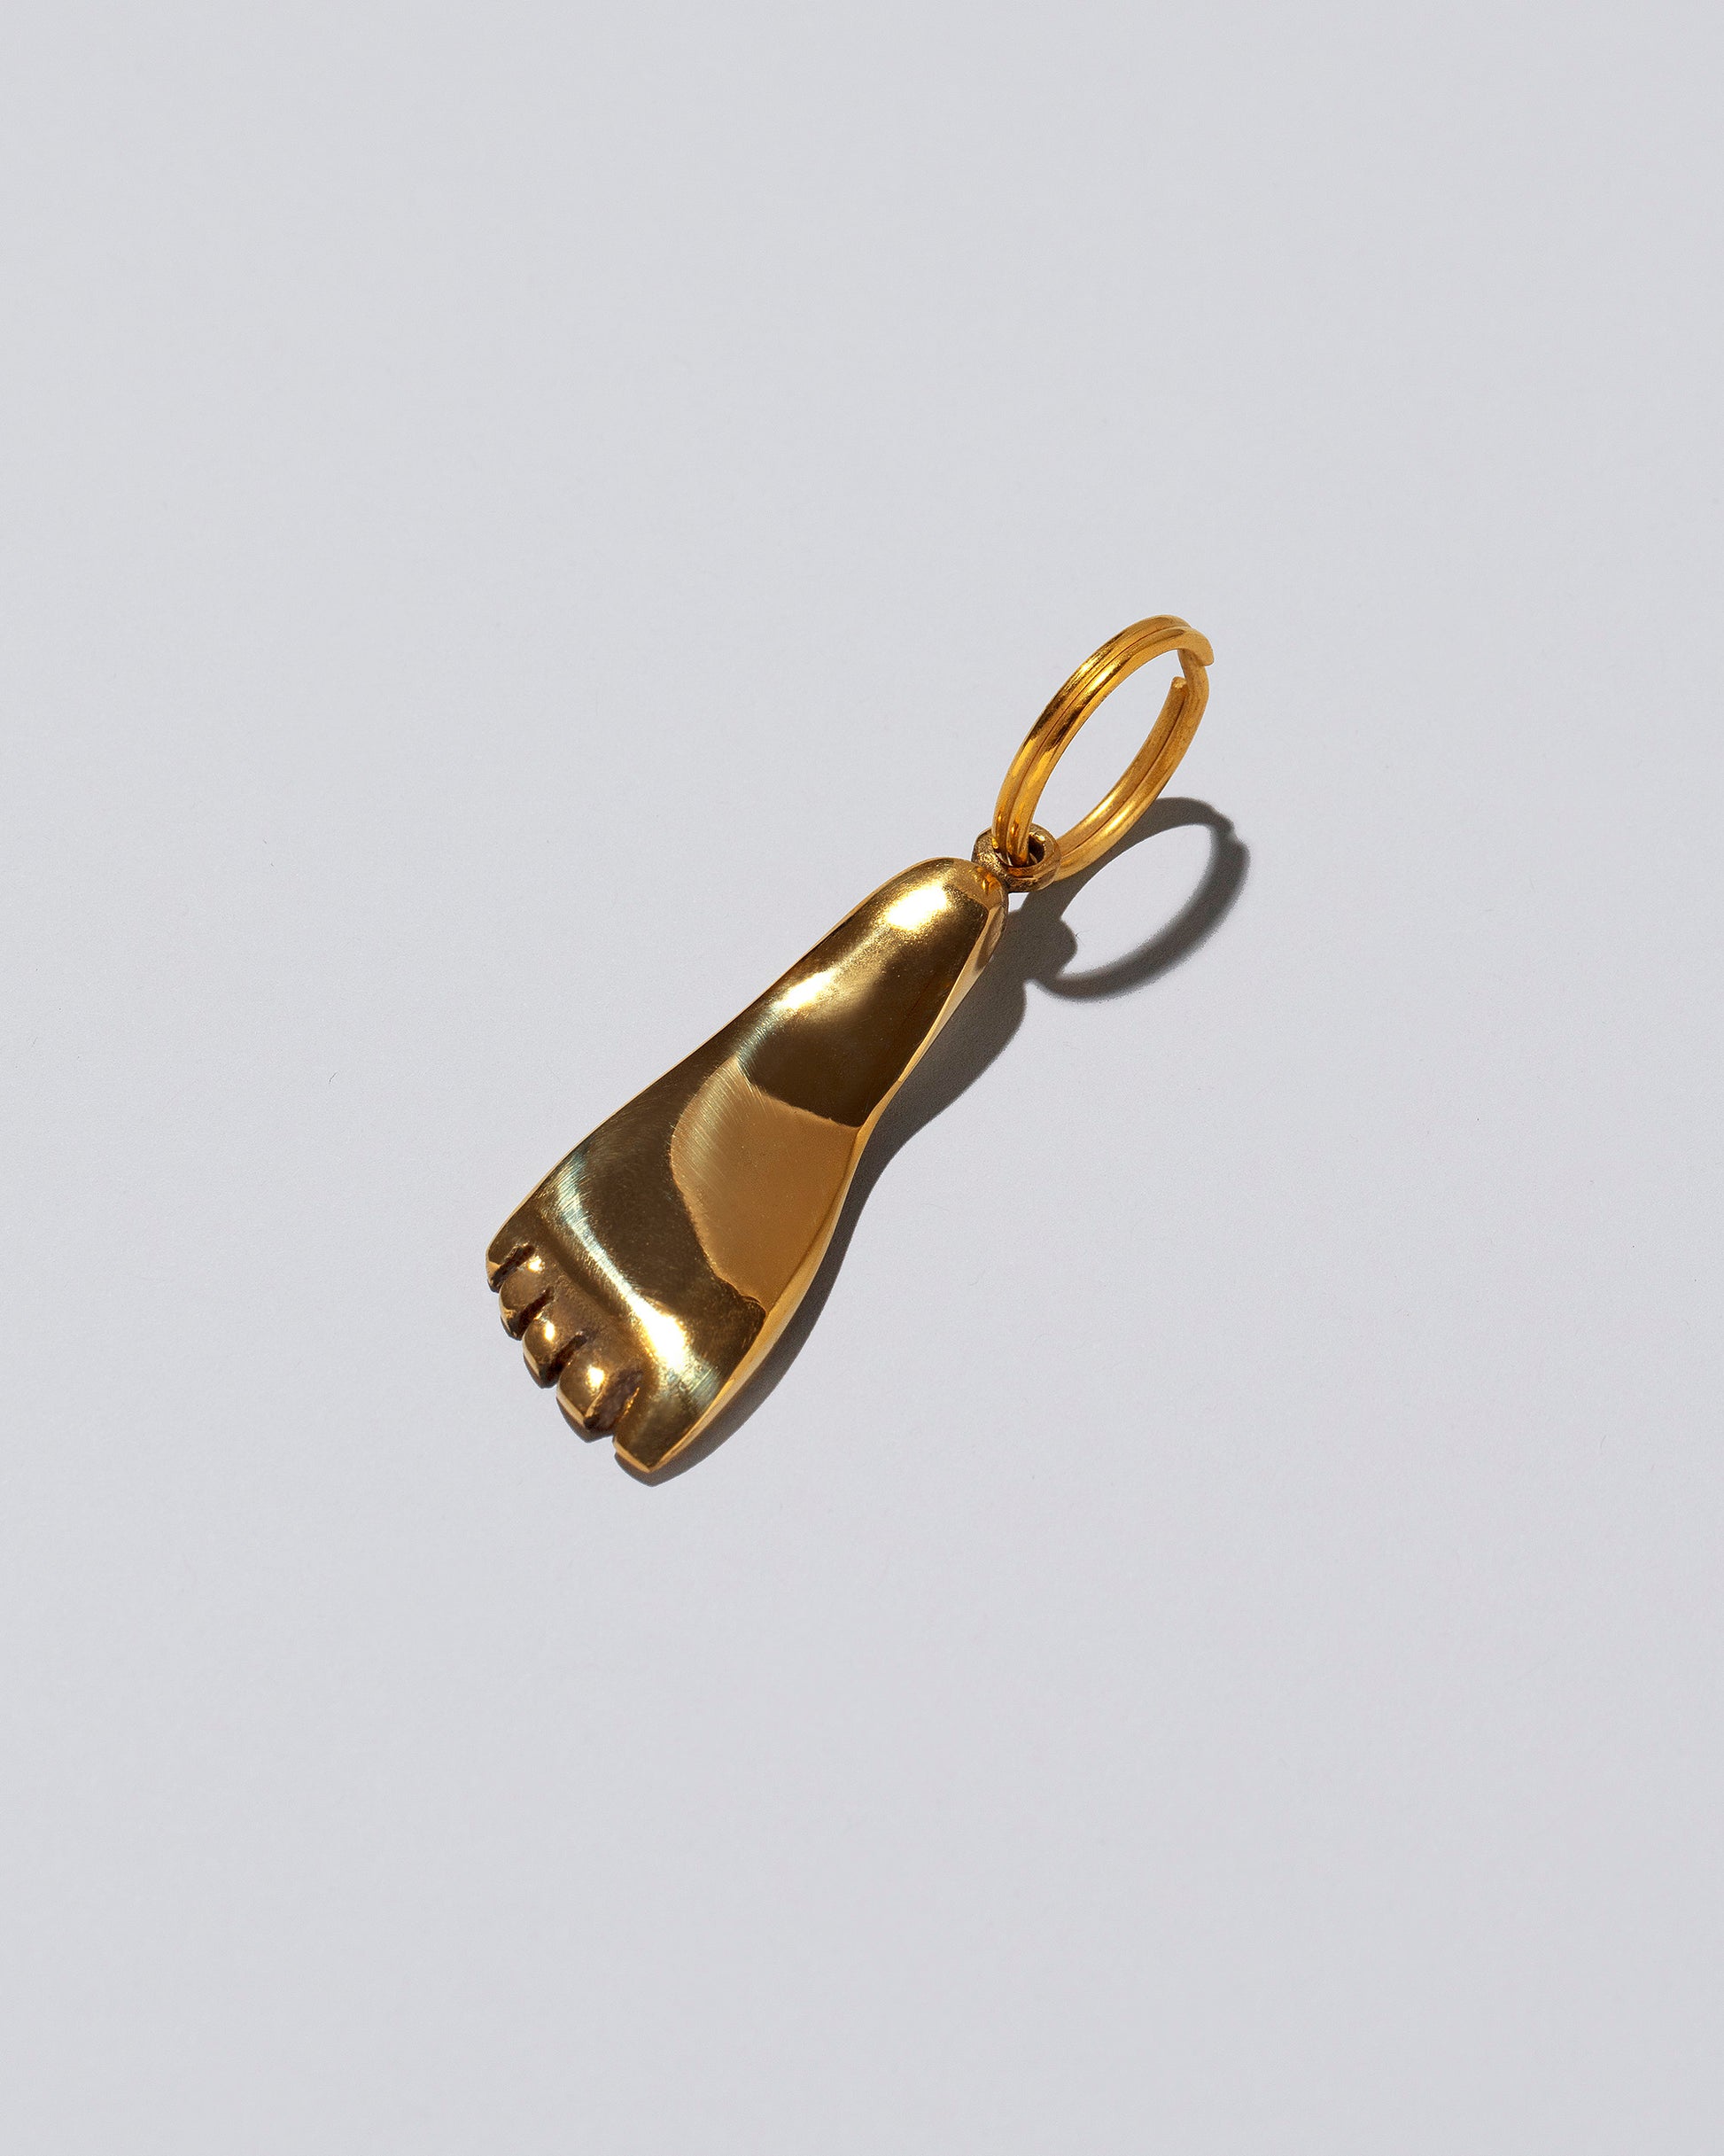 View from the side of the Carl Auböck Brass Foot Keyring on light color background.